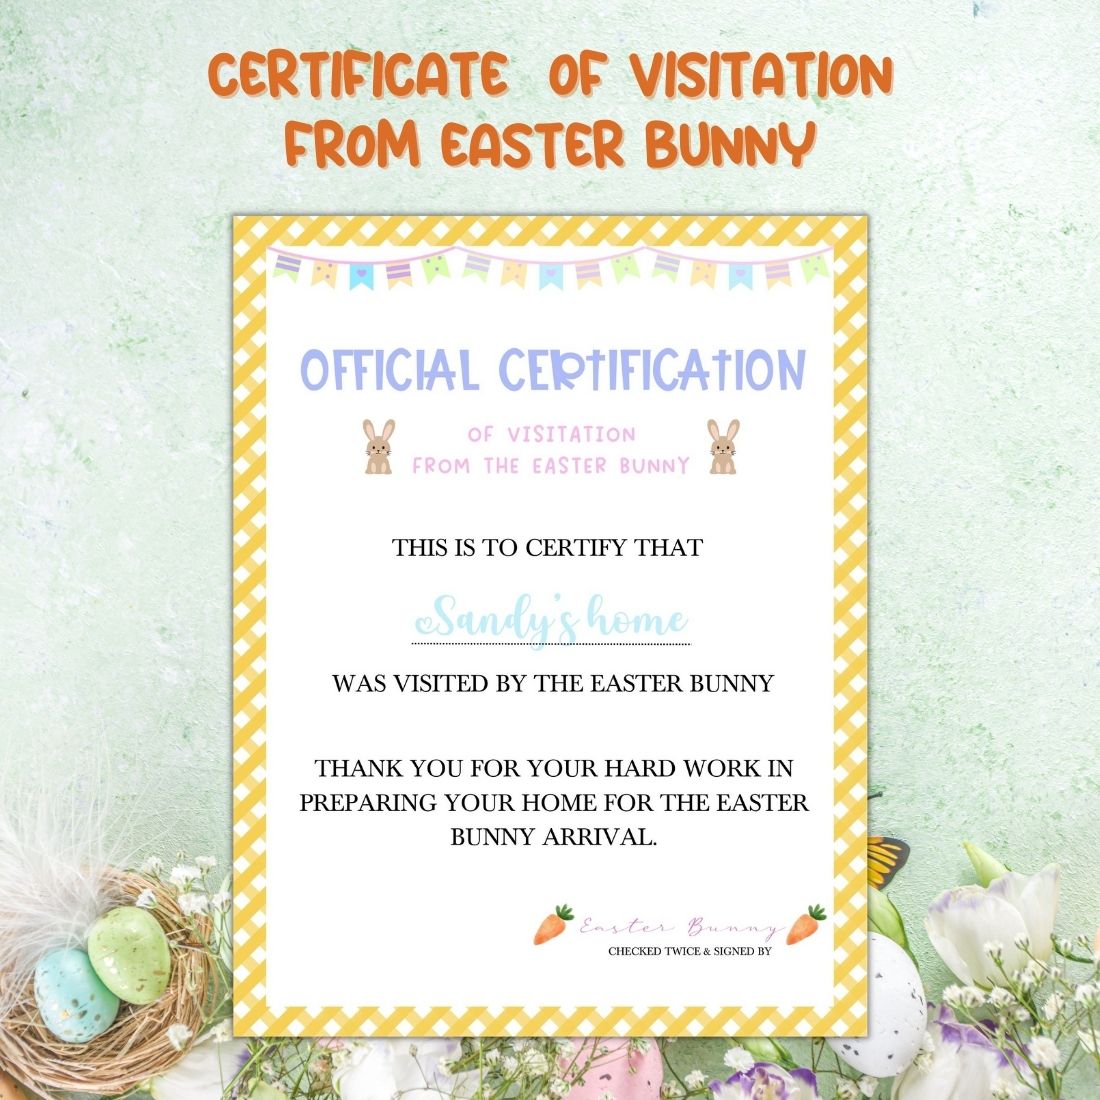 Certificate for an easter bunny.